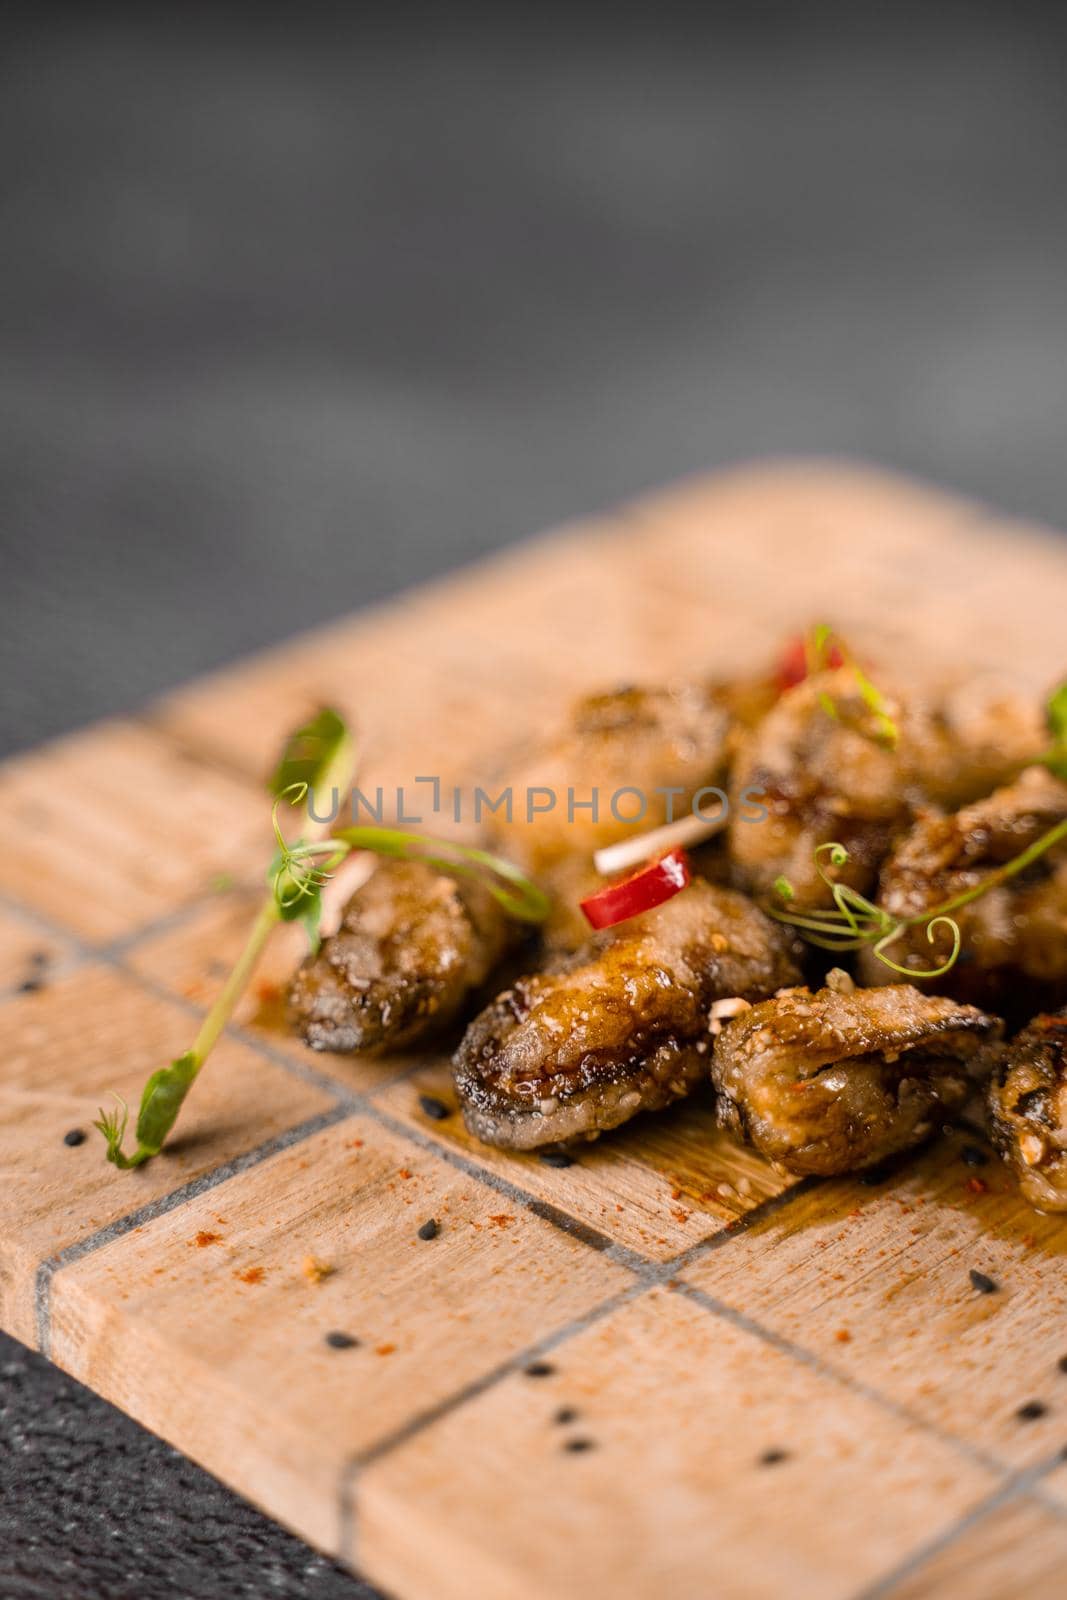 Fried mussels with chili, garlic, sesame, herbs, on square wooden board on gray background